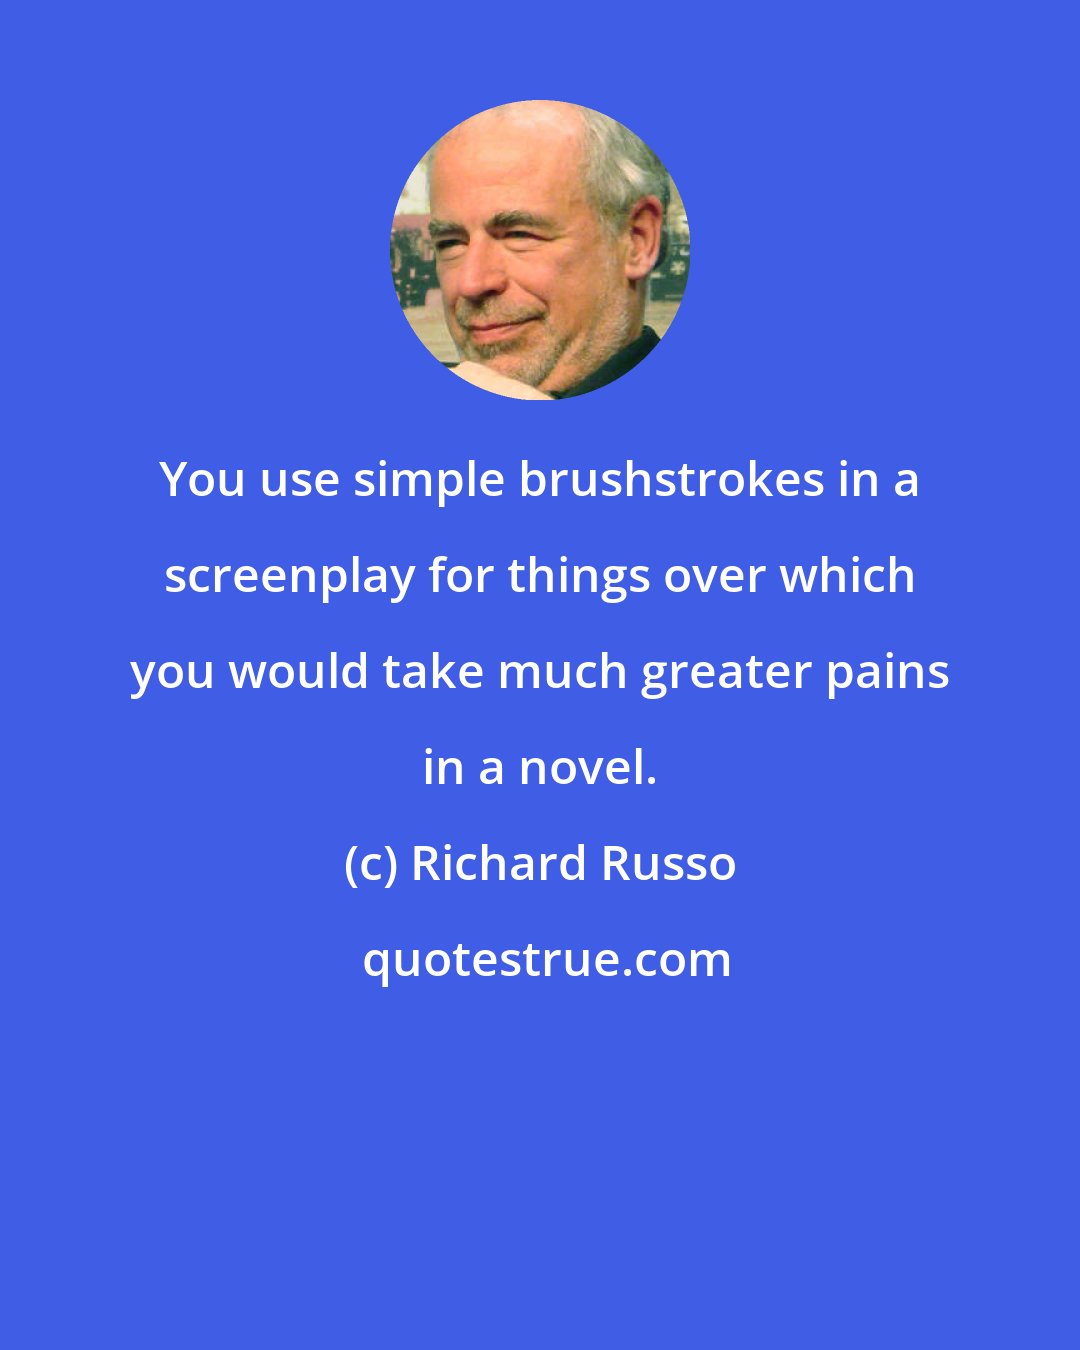 Richard Russo: You use simple brushstrokes in a screenplay for things over which you would take much greater pains in a novel.